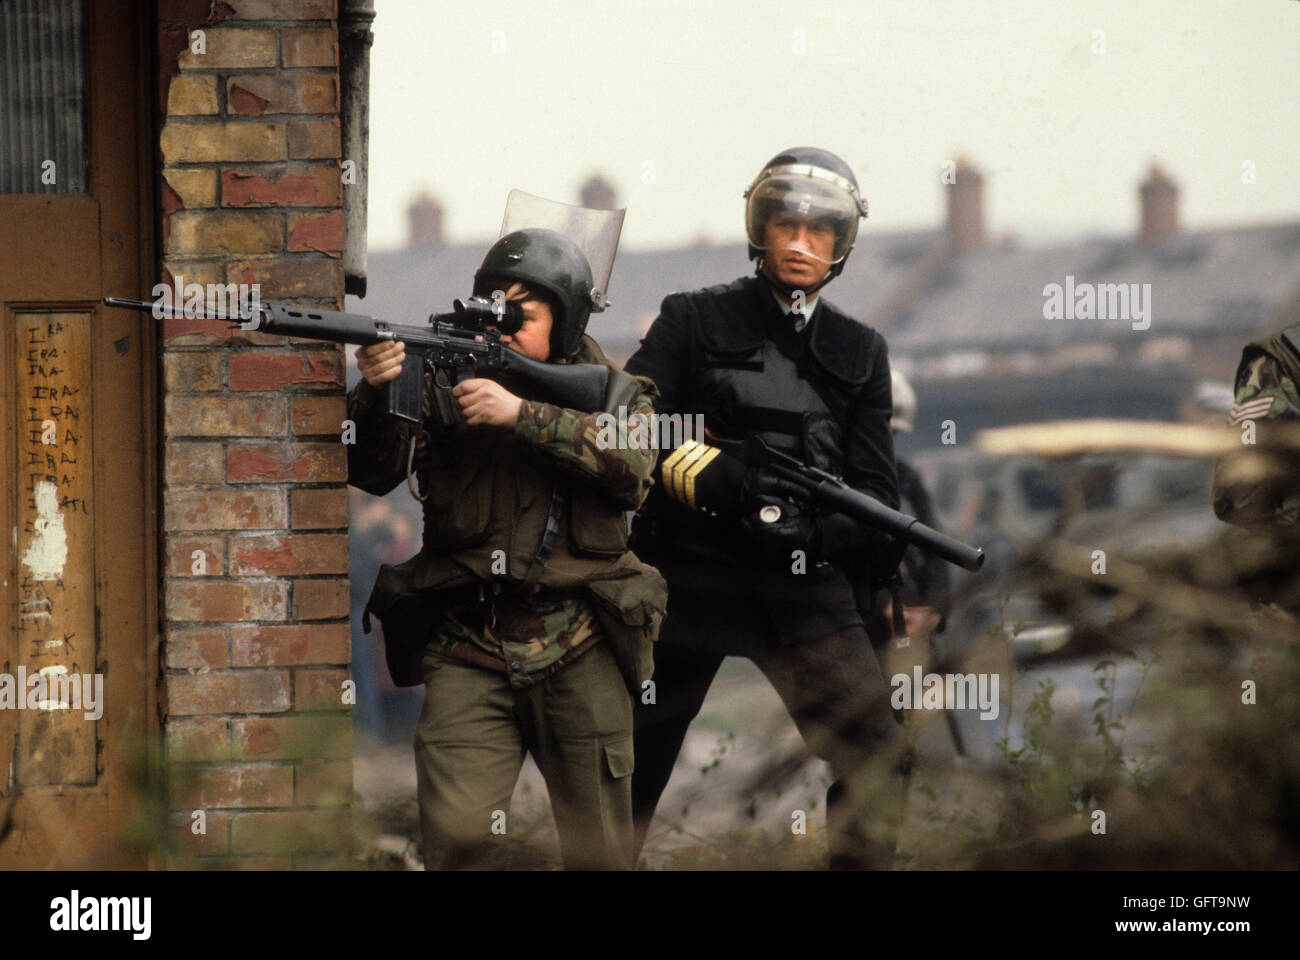 Belfast The Troubles 1980s. Royal Ulster Constabulary, armed RUC police officer and British soldier 80s UK HOMER SYKES Stock Photo